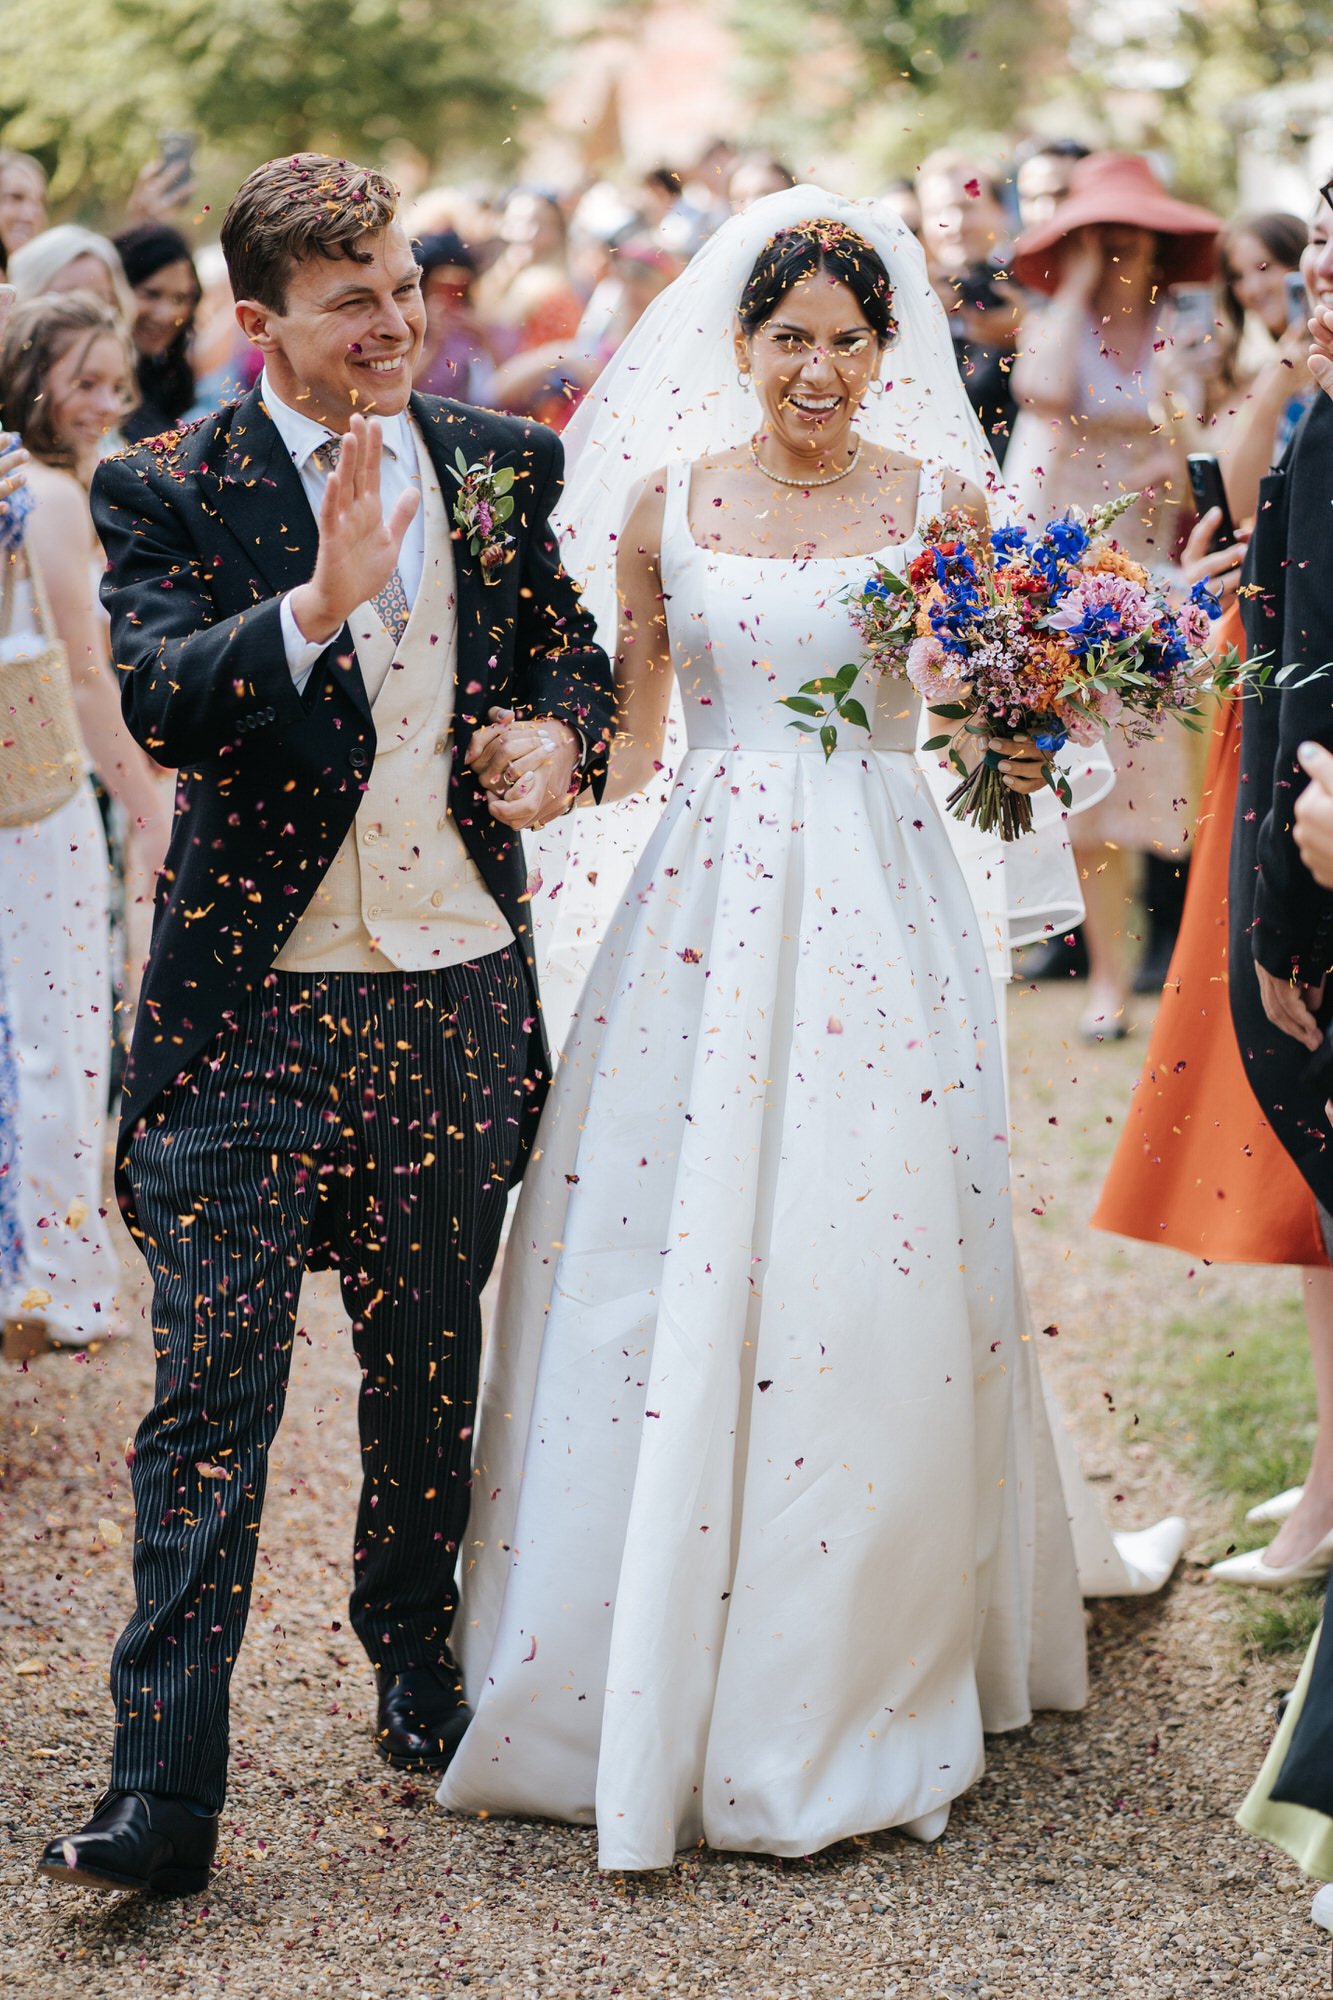 Bride and groom extremely joyful as they walk through a tunnel of confetti after exiting the church in Woodbridge